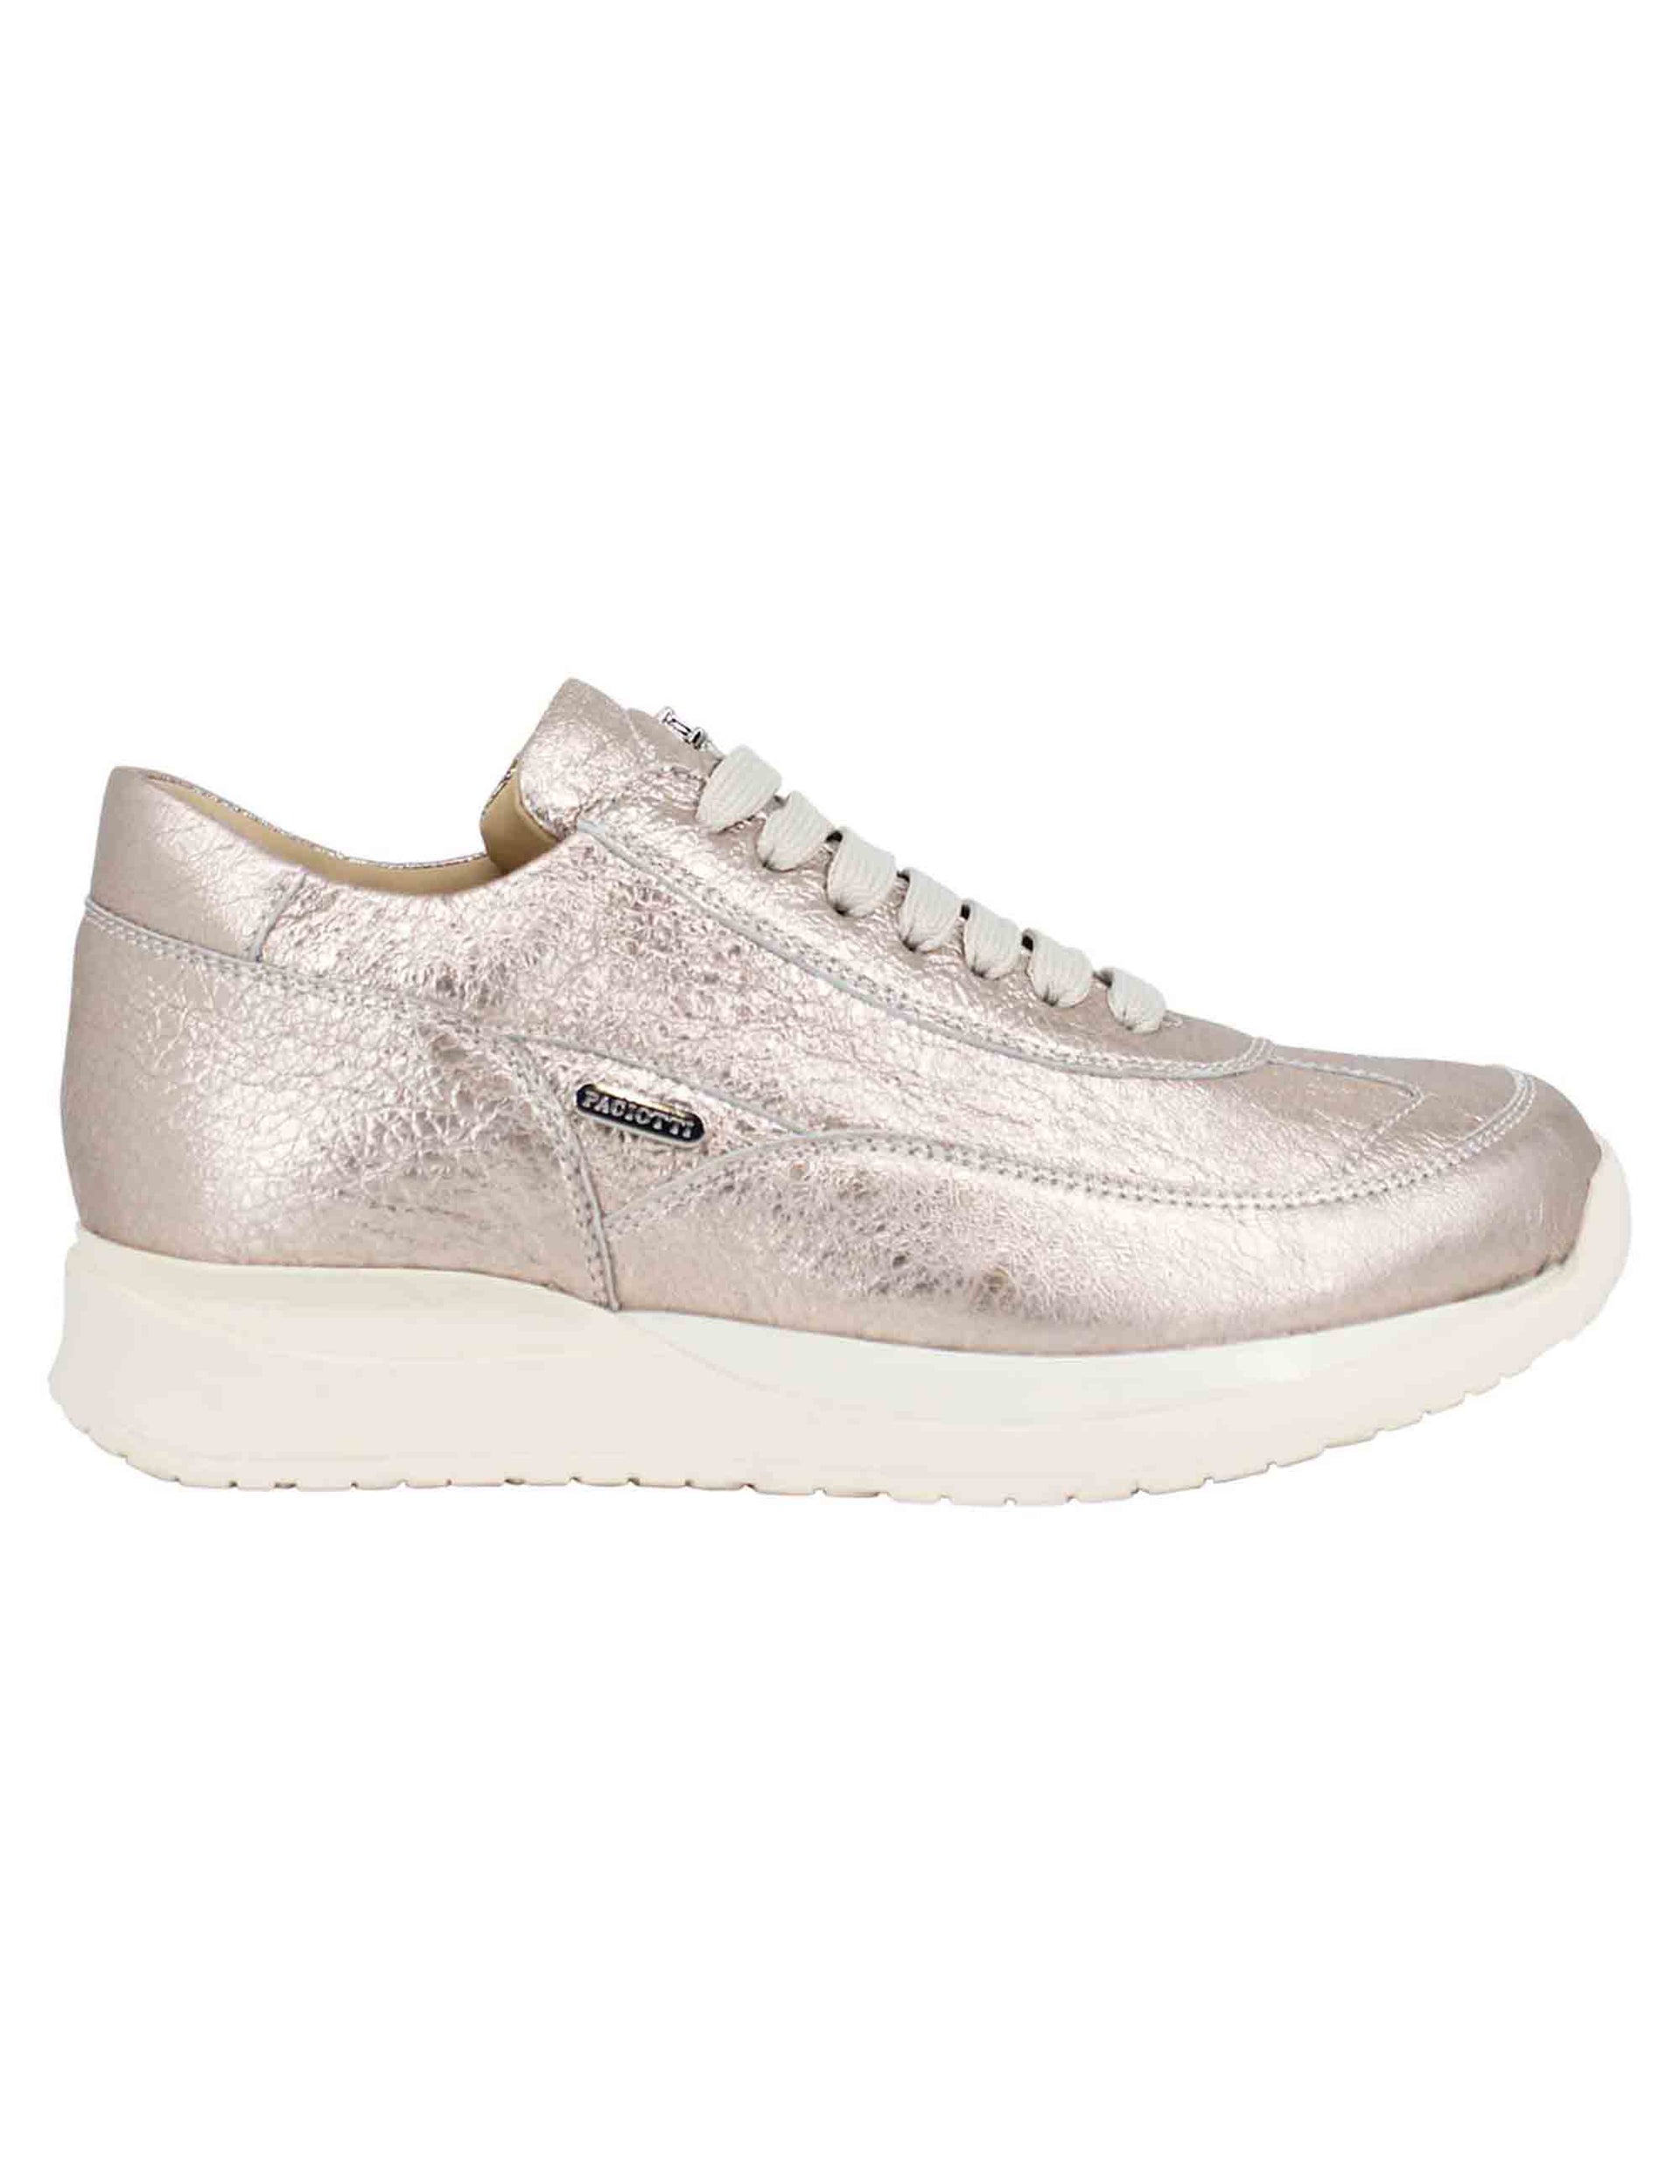 Women's sneakers in pink laminated leather